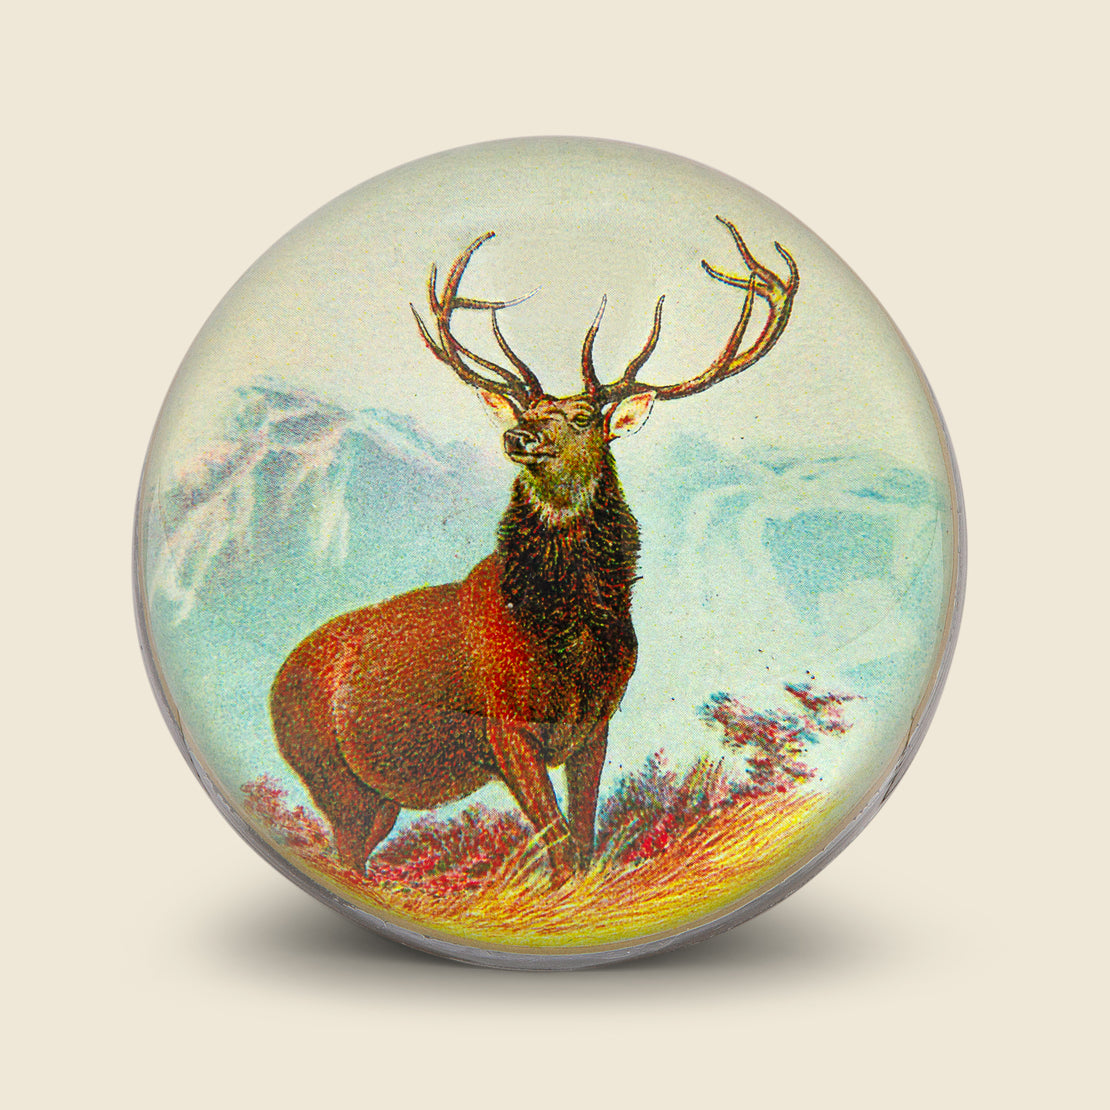 John Derian Stag in Grass Dome Paperweight